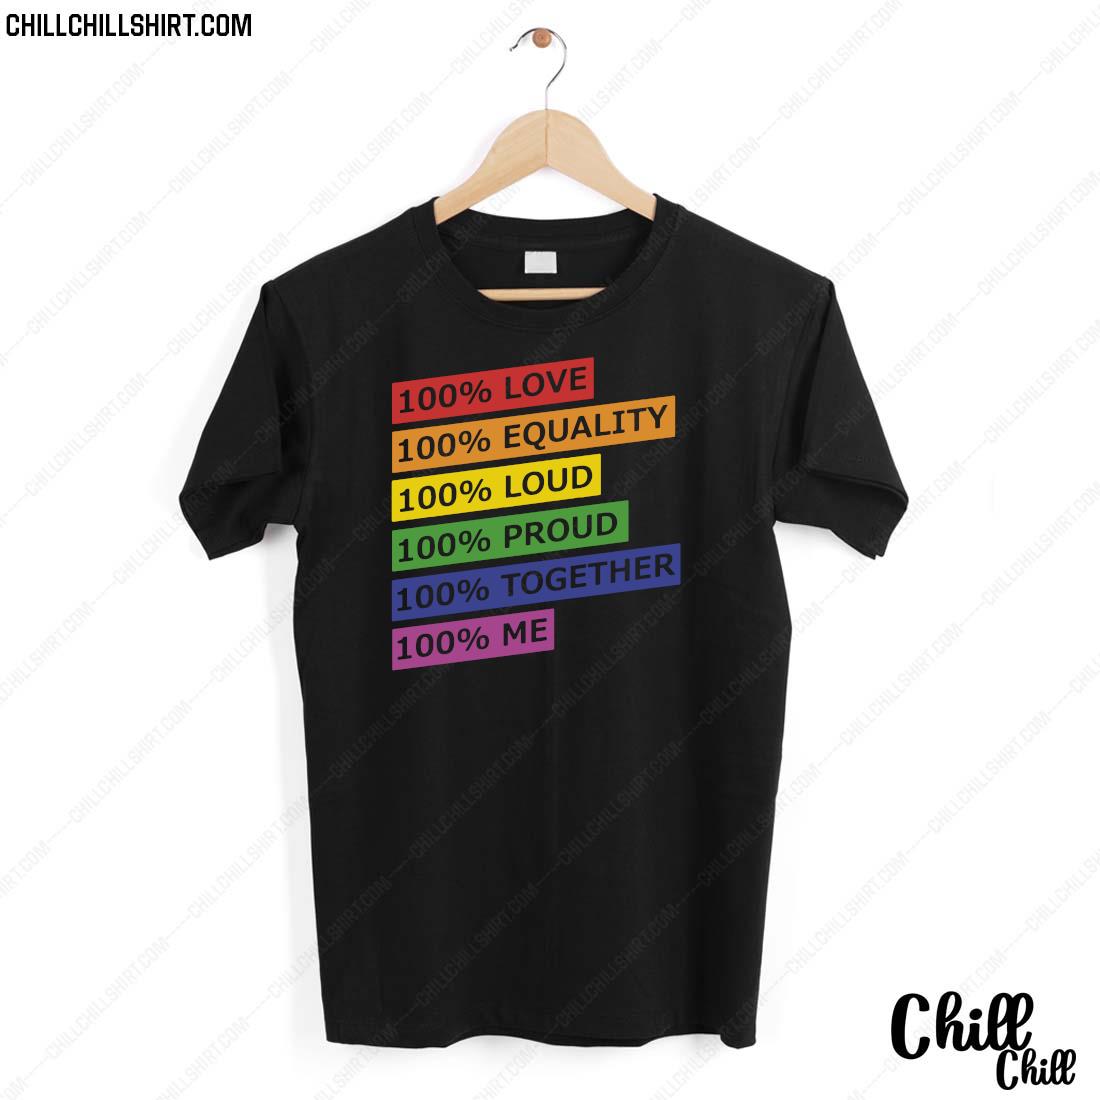 100 Love Equality Loud Proud Together Me Shirt